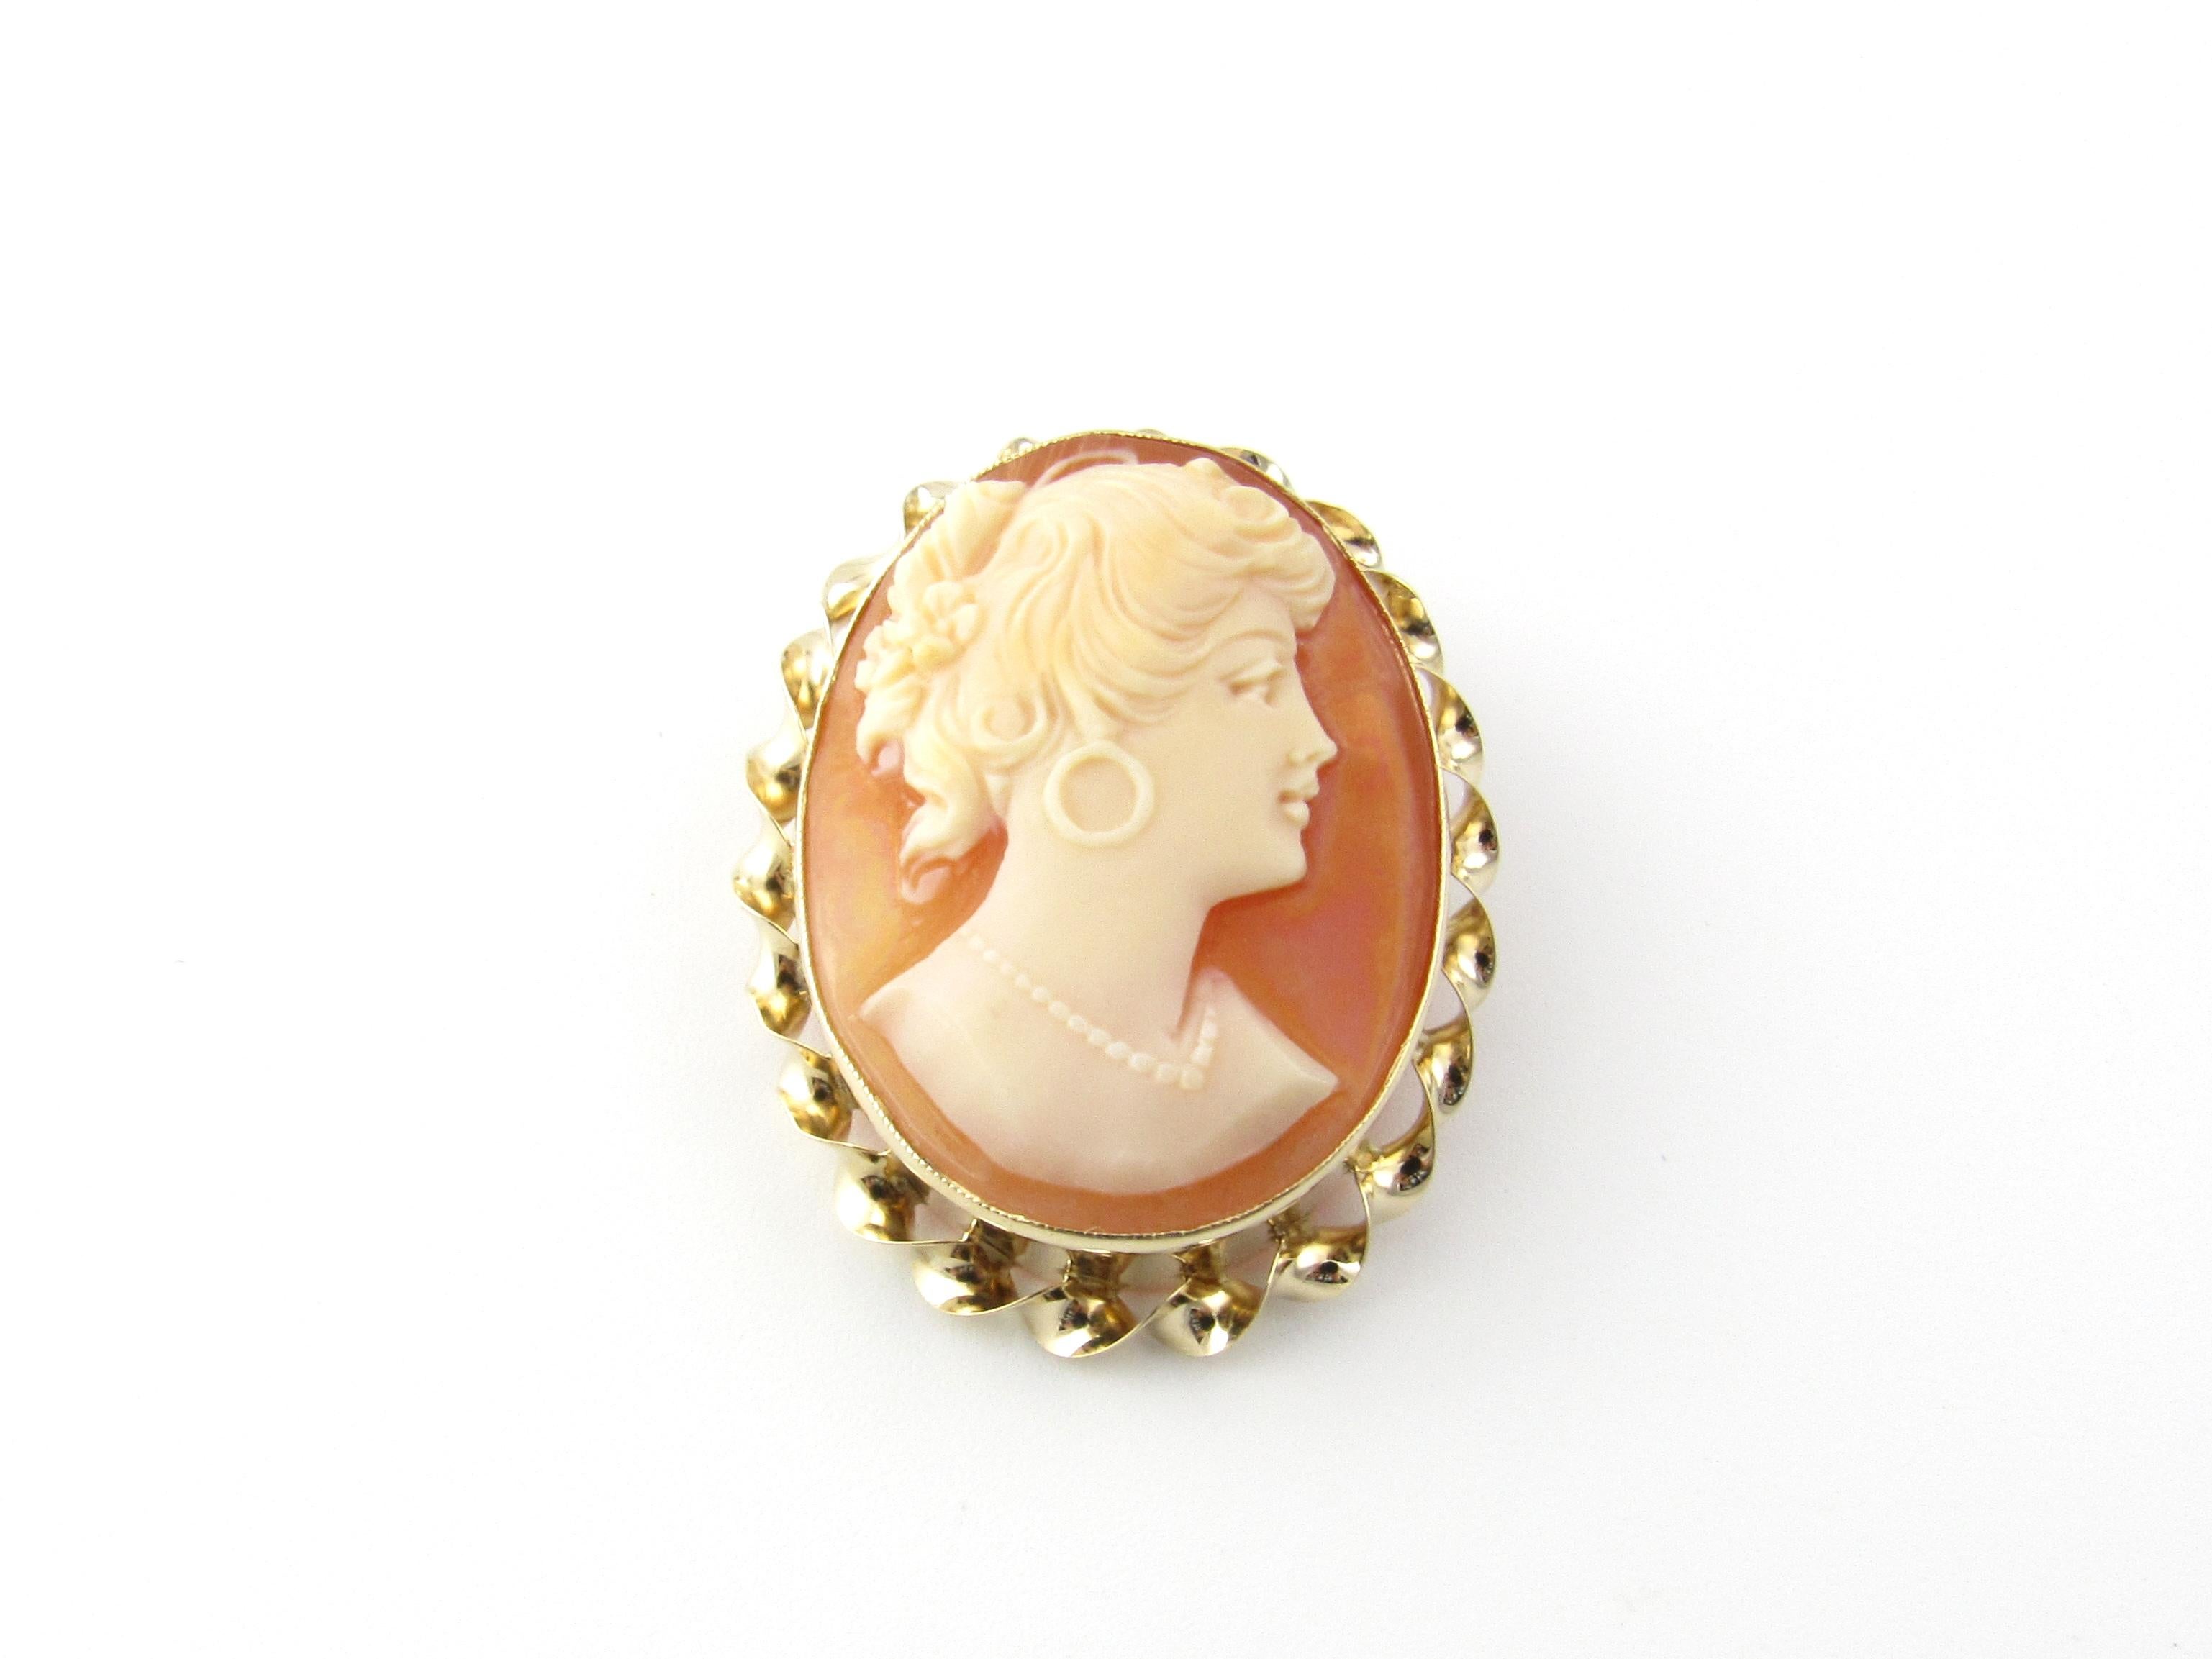 Vintage 14 Karat Yellow Gold Cameo Brooch/Pendant

This elegant cameo features a lovely lady in profile set in beautifully detailed 14K yellow gold.

Size: 35 mm x 29 mm

Weight: 5.5 dwt. / 8.7 gr.

Stamped: 14K

Very good condition, professionally